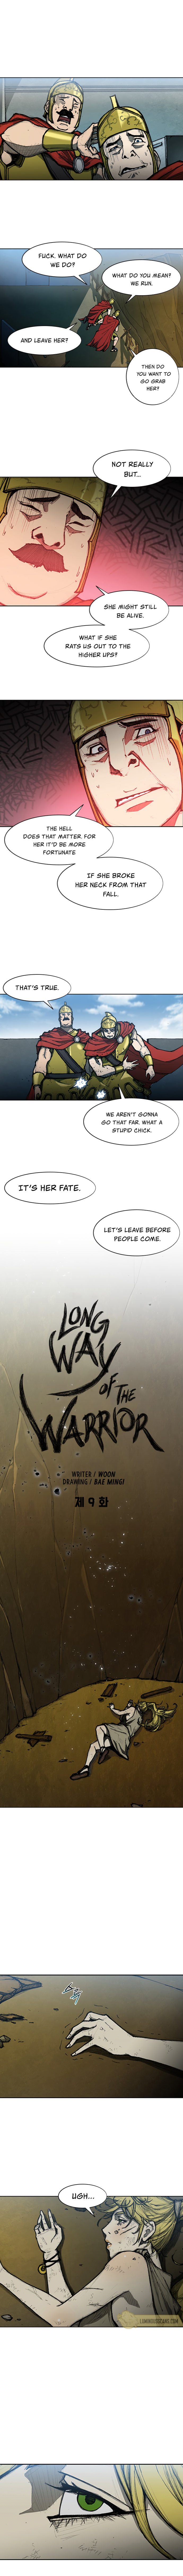 Long Way of the Warrior - Chapter 9 Page 5